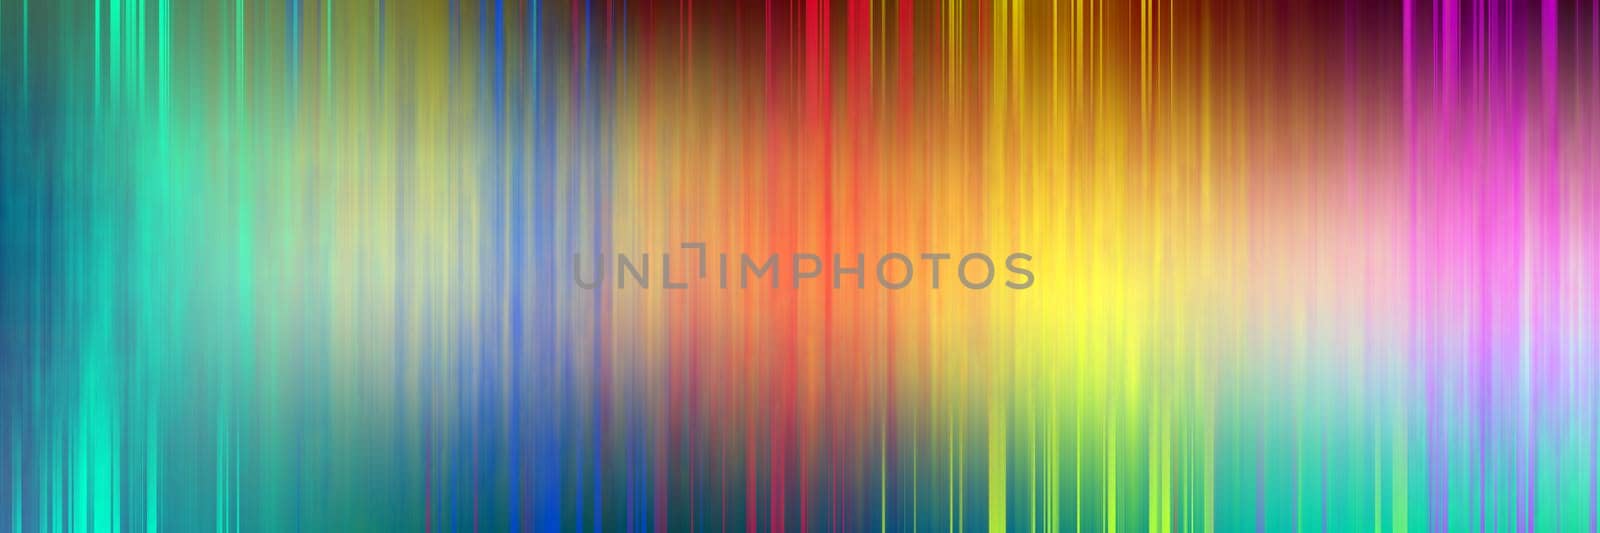 background for banner design. color colorful illustration for decoration. The effect of a blurred image. The effect of movement by paca-waca